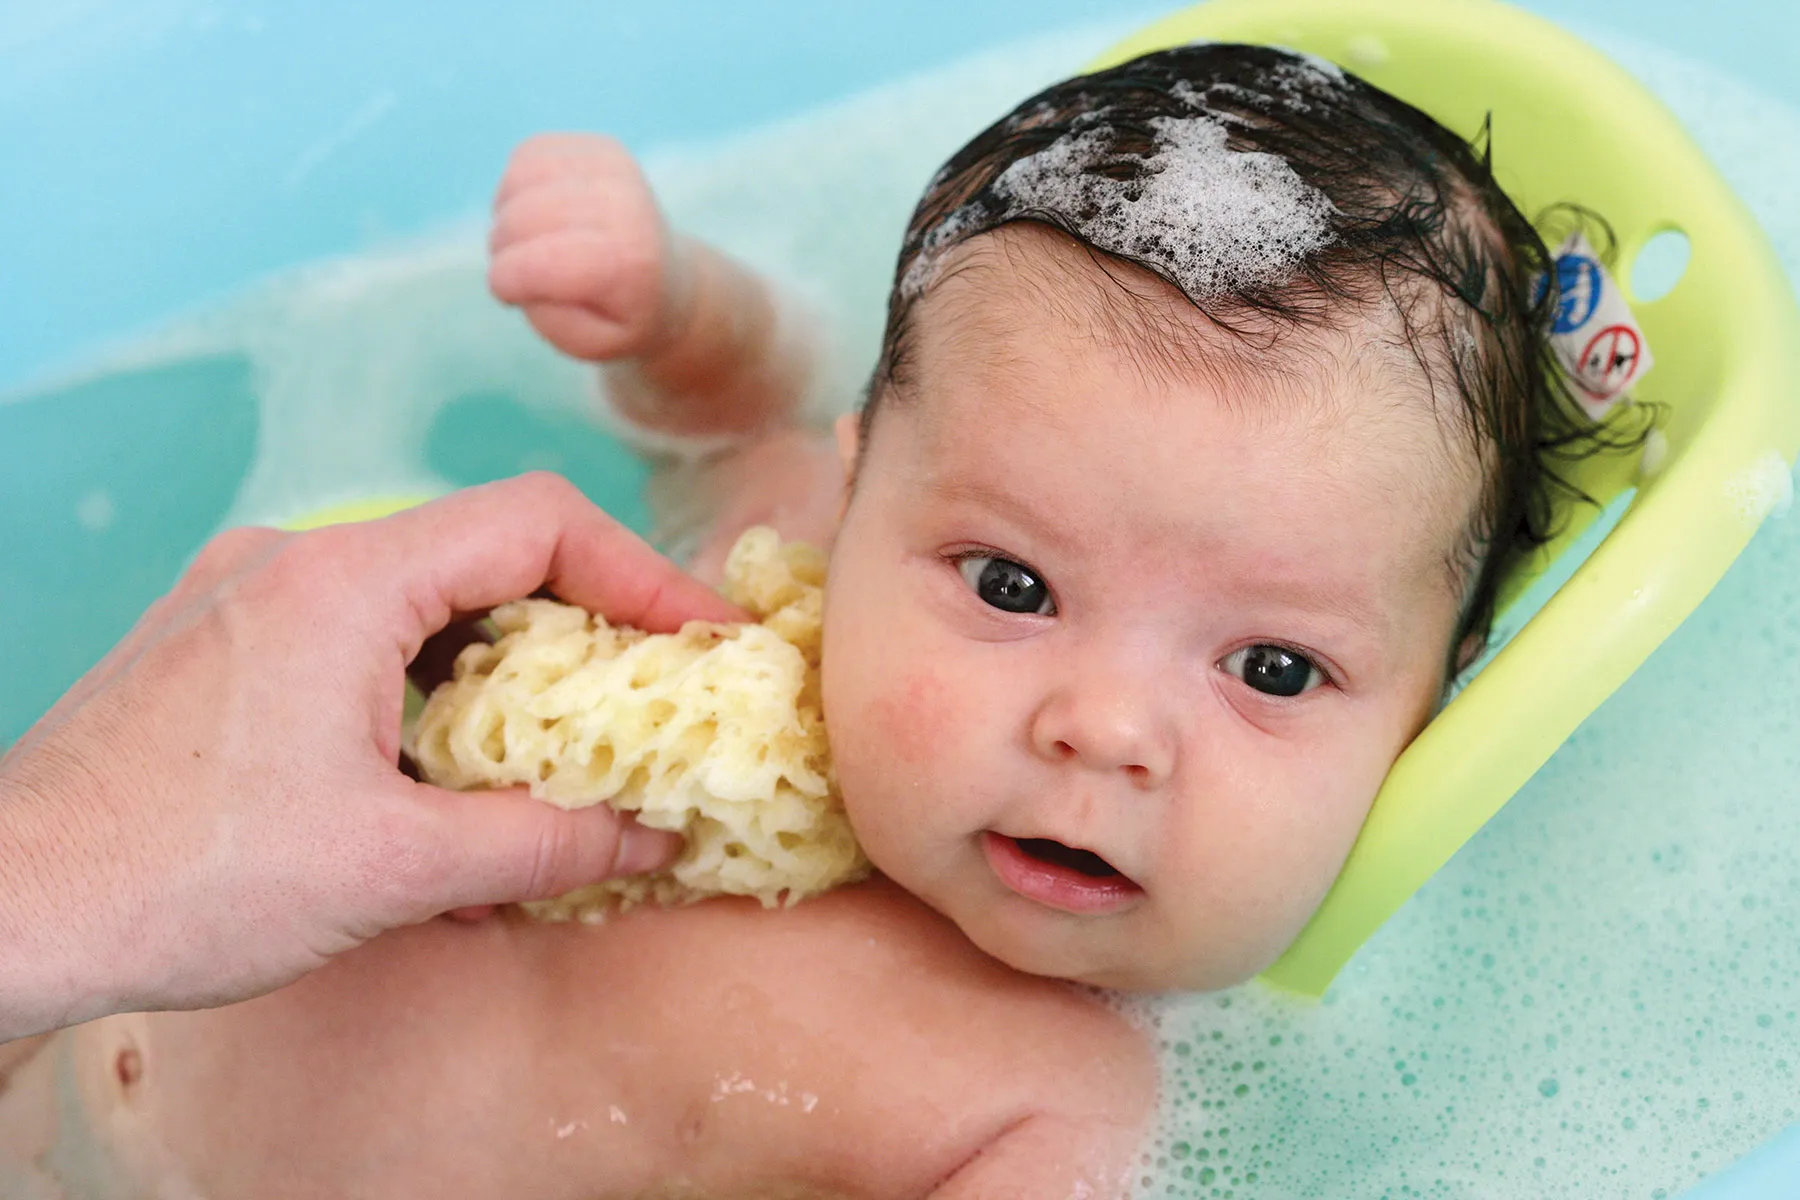 Help Baby Like Bath / 13 Useful Tips To Make Bath Time Less Traumatic For Our Baby Neolittle - Narrating a story that involves needing to get cleaned up, or about filling a lake or pool, may help smooth the transition.